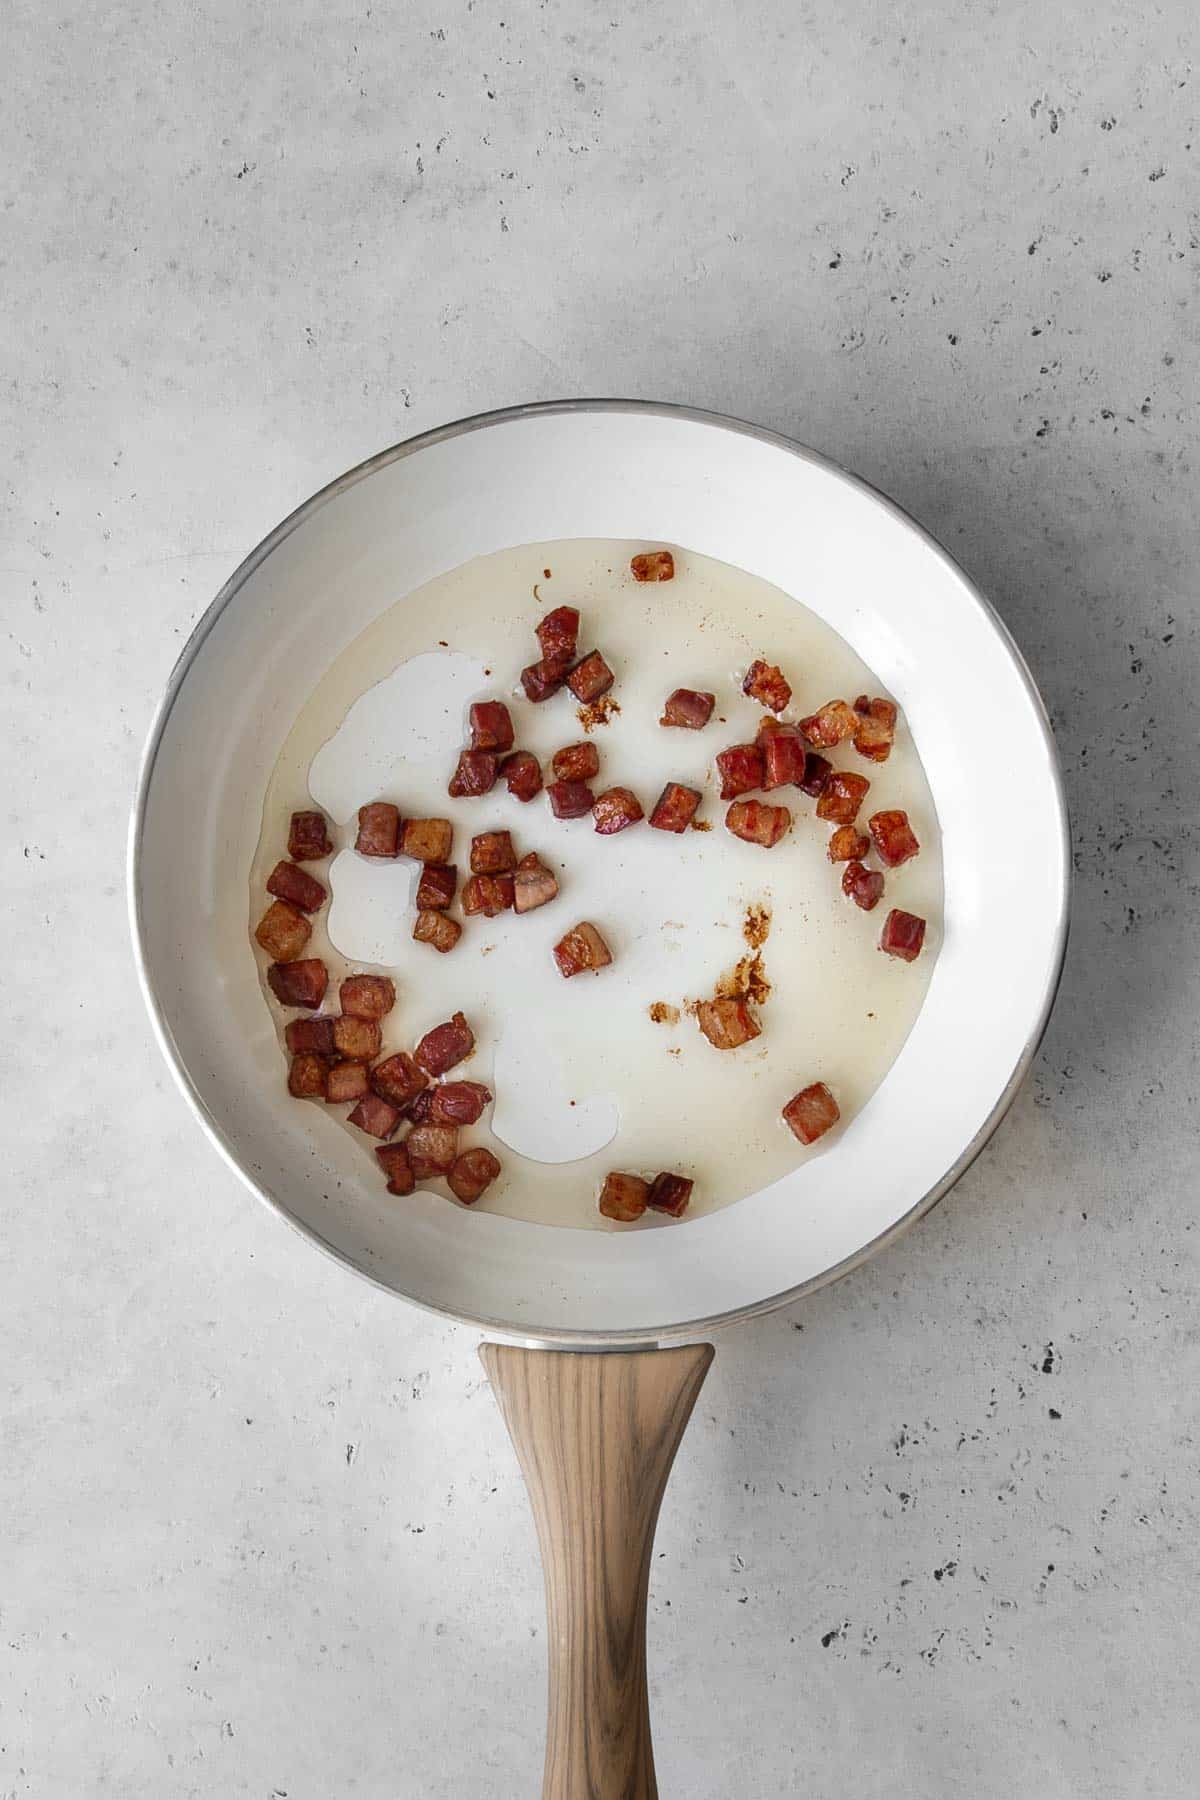 Crispy pancetta arranged in a white pan with wooden handle on table.